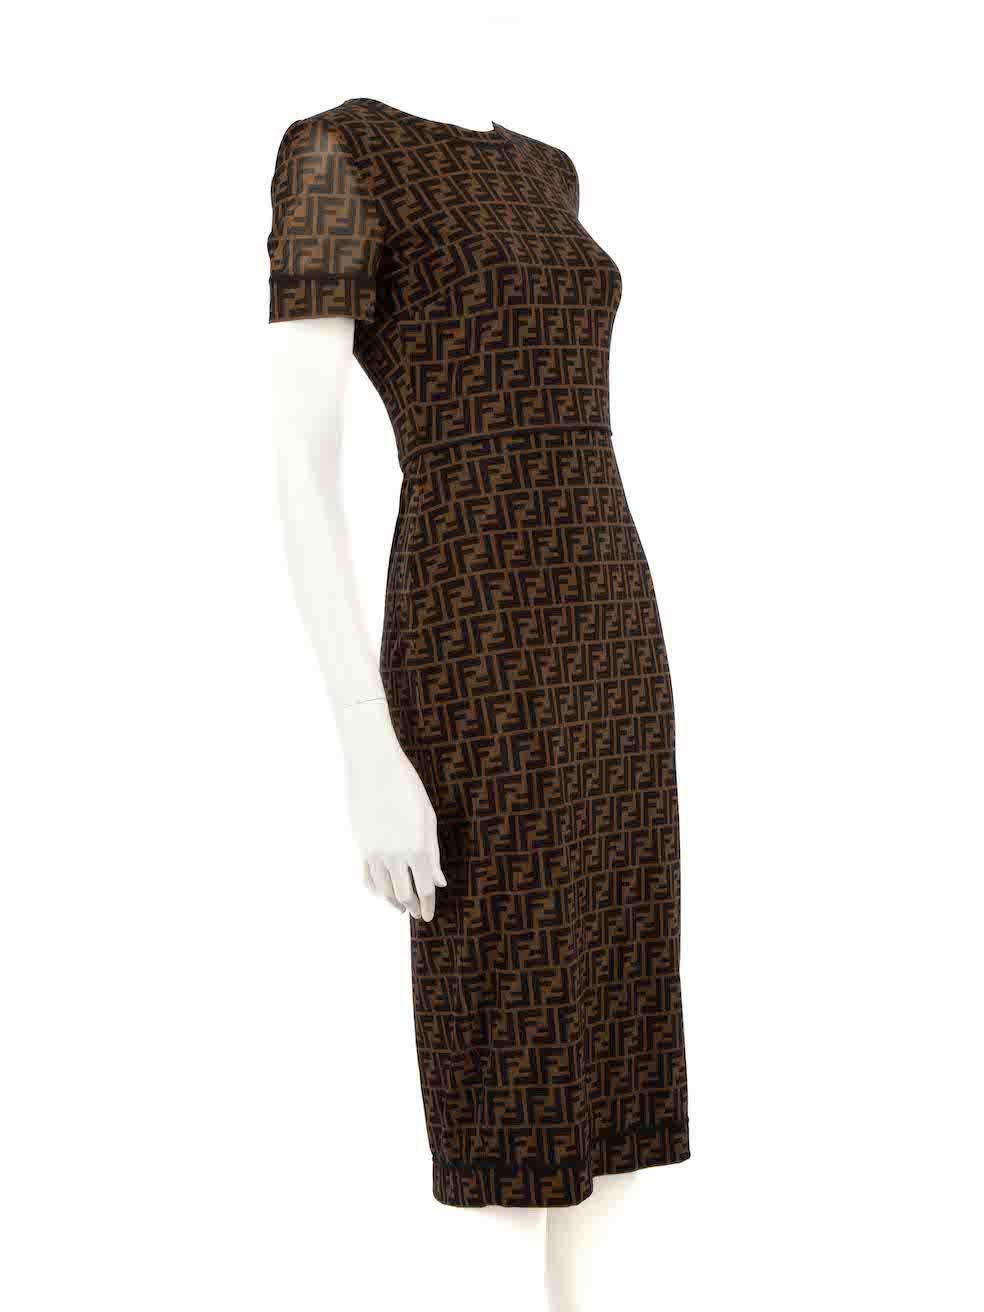 CONDITION is Very good. Minimal wear to dress is evident. Minimal wear seen inside the neckline where a woven piece has become frayed on this used Fendi designer resale item.
 
 
 
 Details
 
 
 Brown
 
 Synthetic
 
 Bodycon dress
 
 Zucca FF